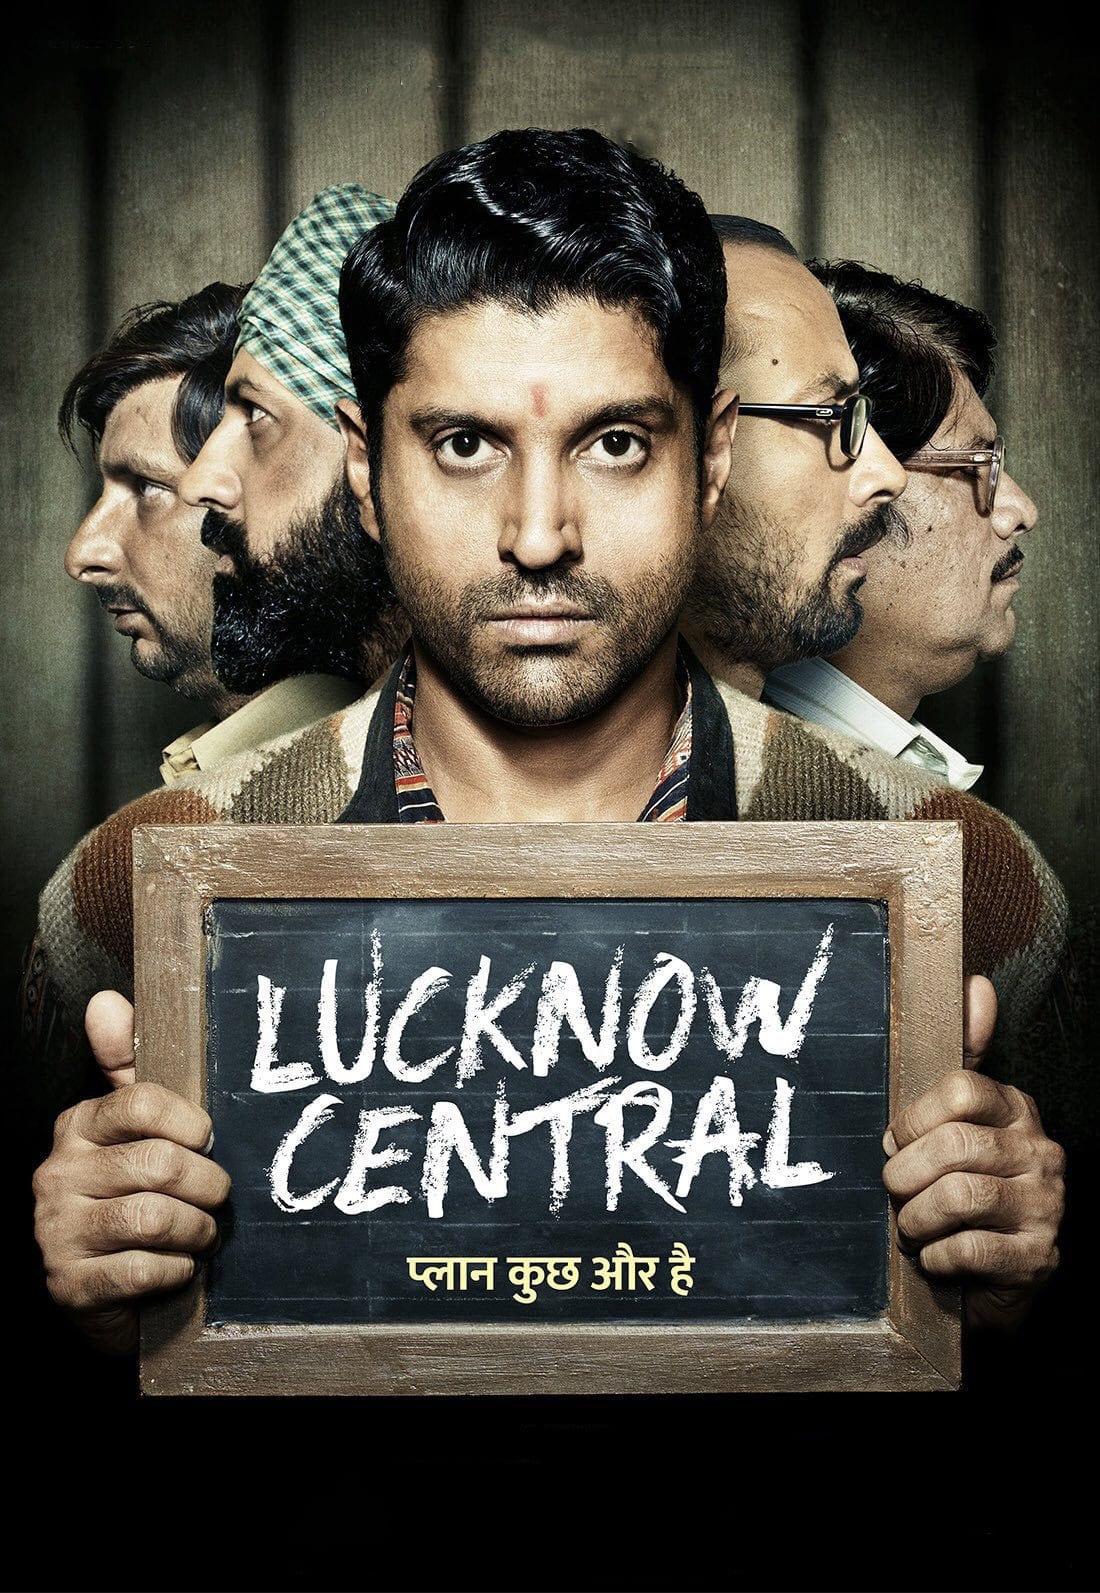 Poster for the movie "Lucknow Central"